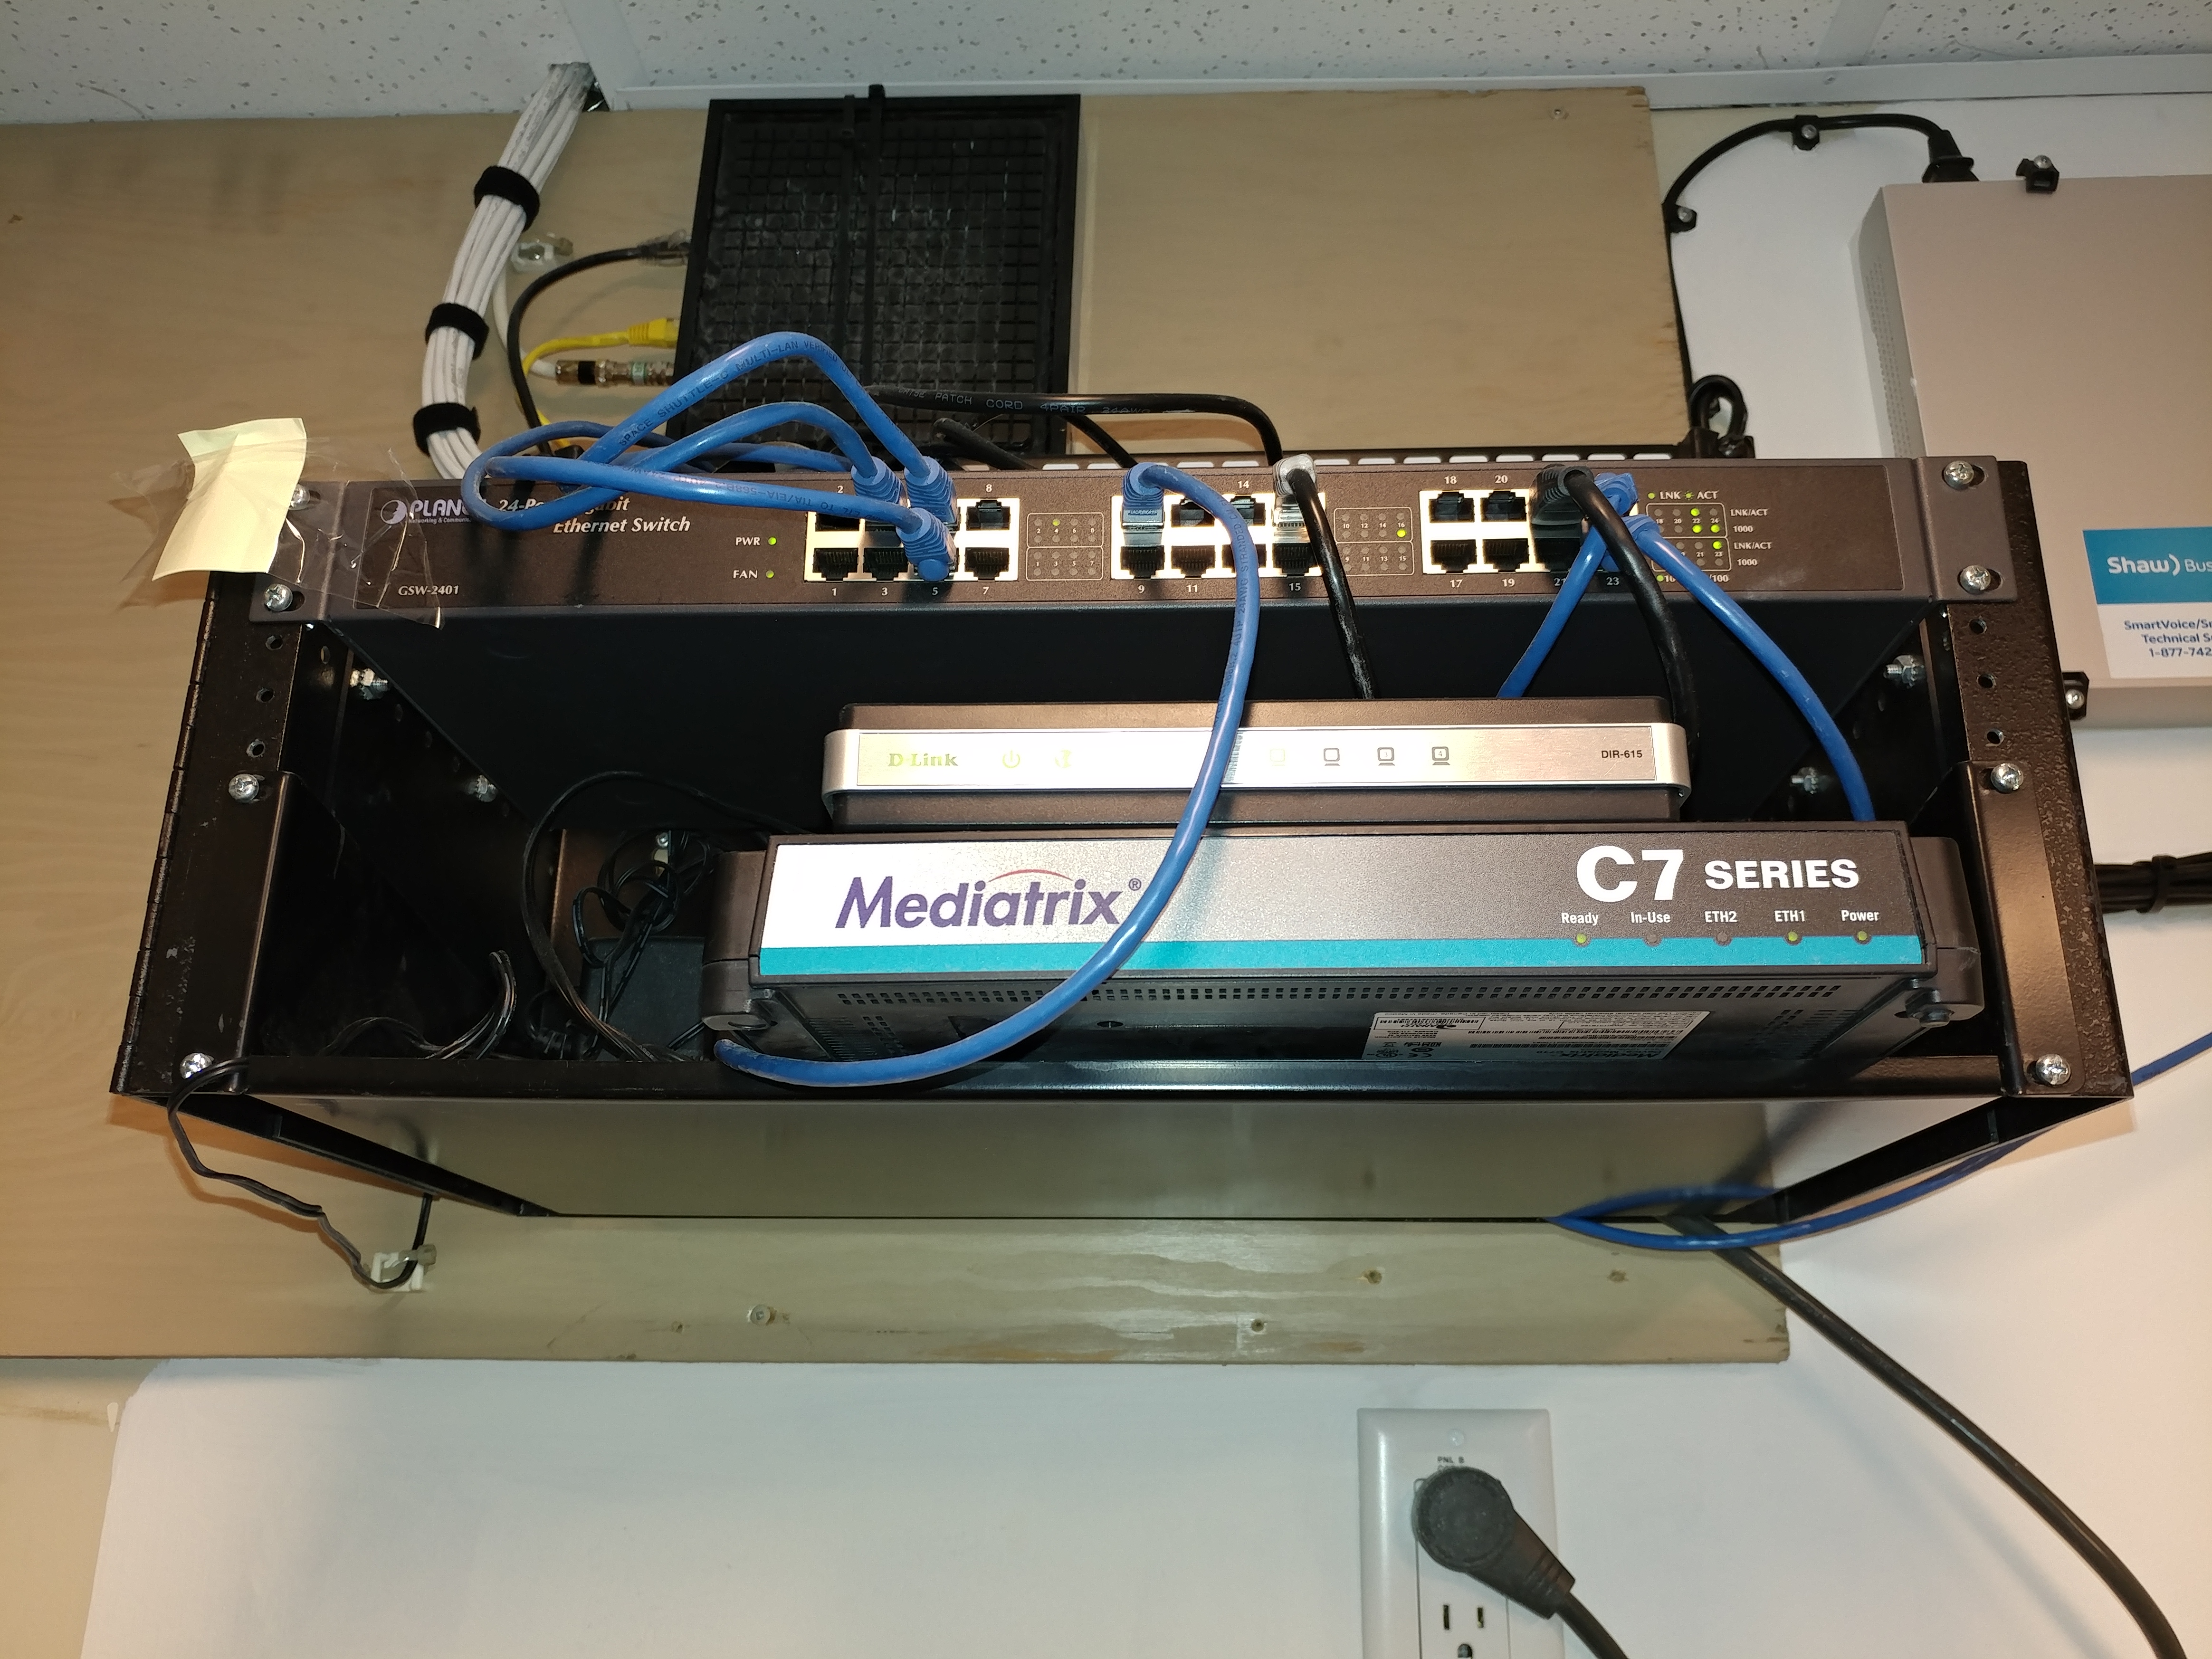 Ethernet switch, Internet router, and VOIP gateway setup